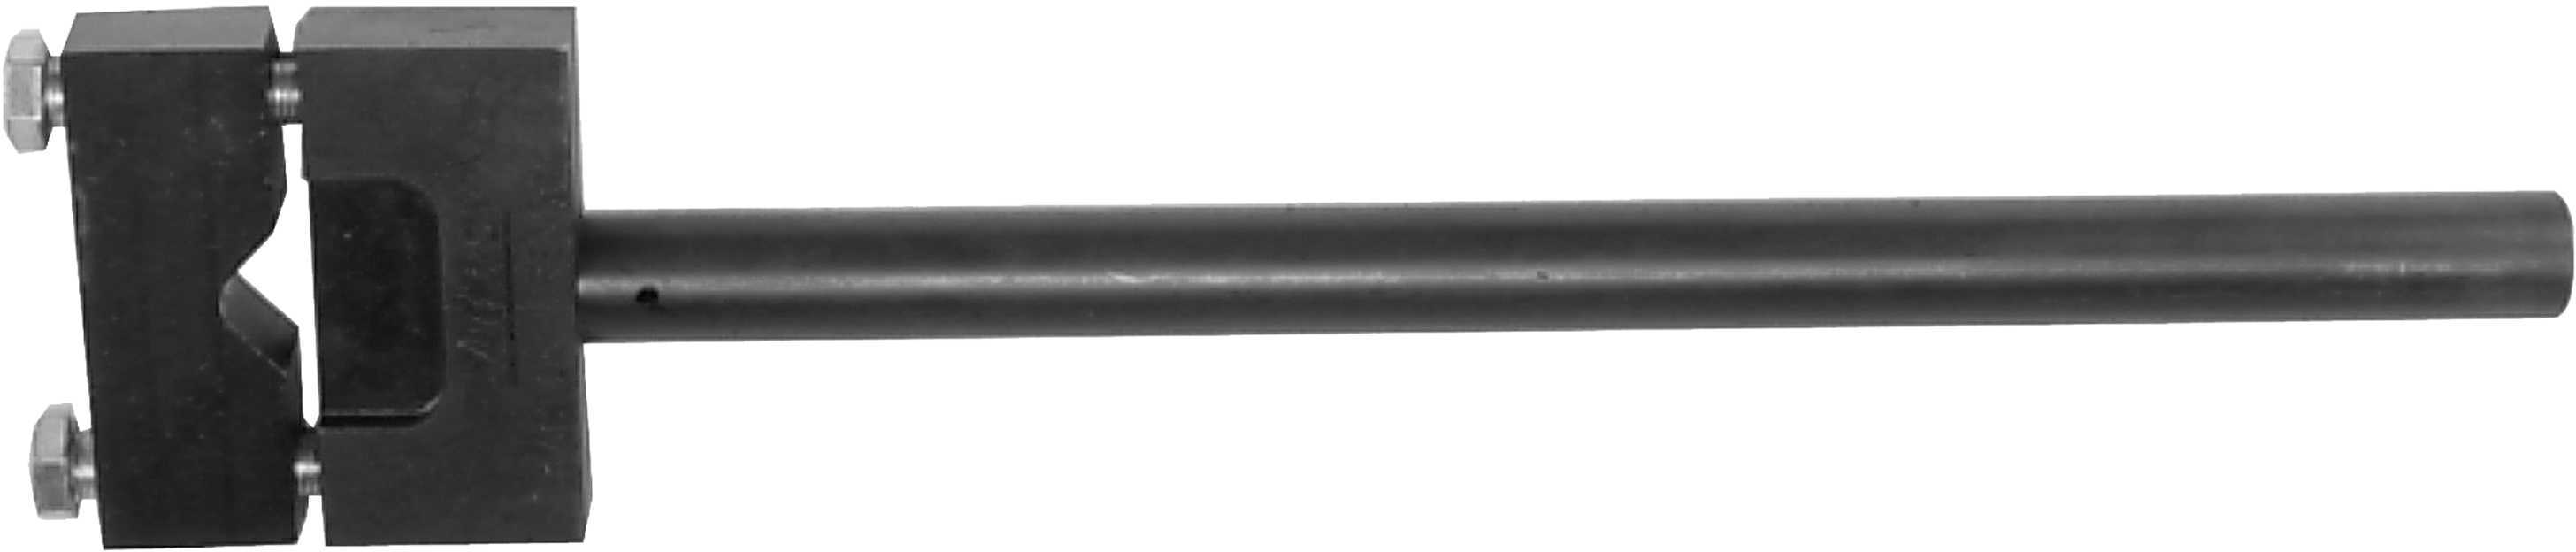 Wheeler Action Wrench #1 - Mauser/Flat 808771